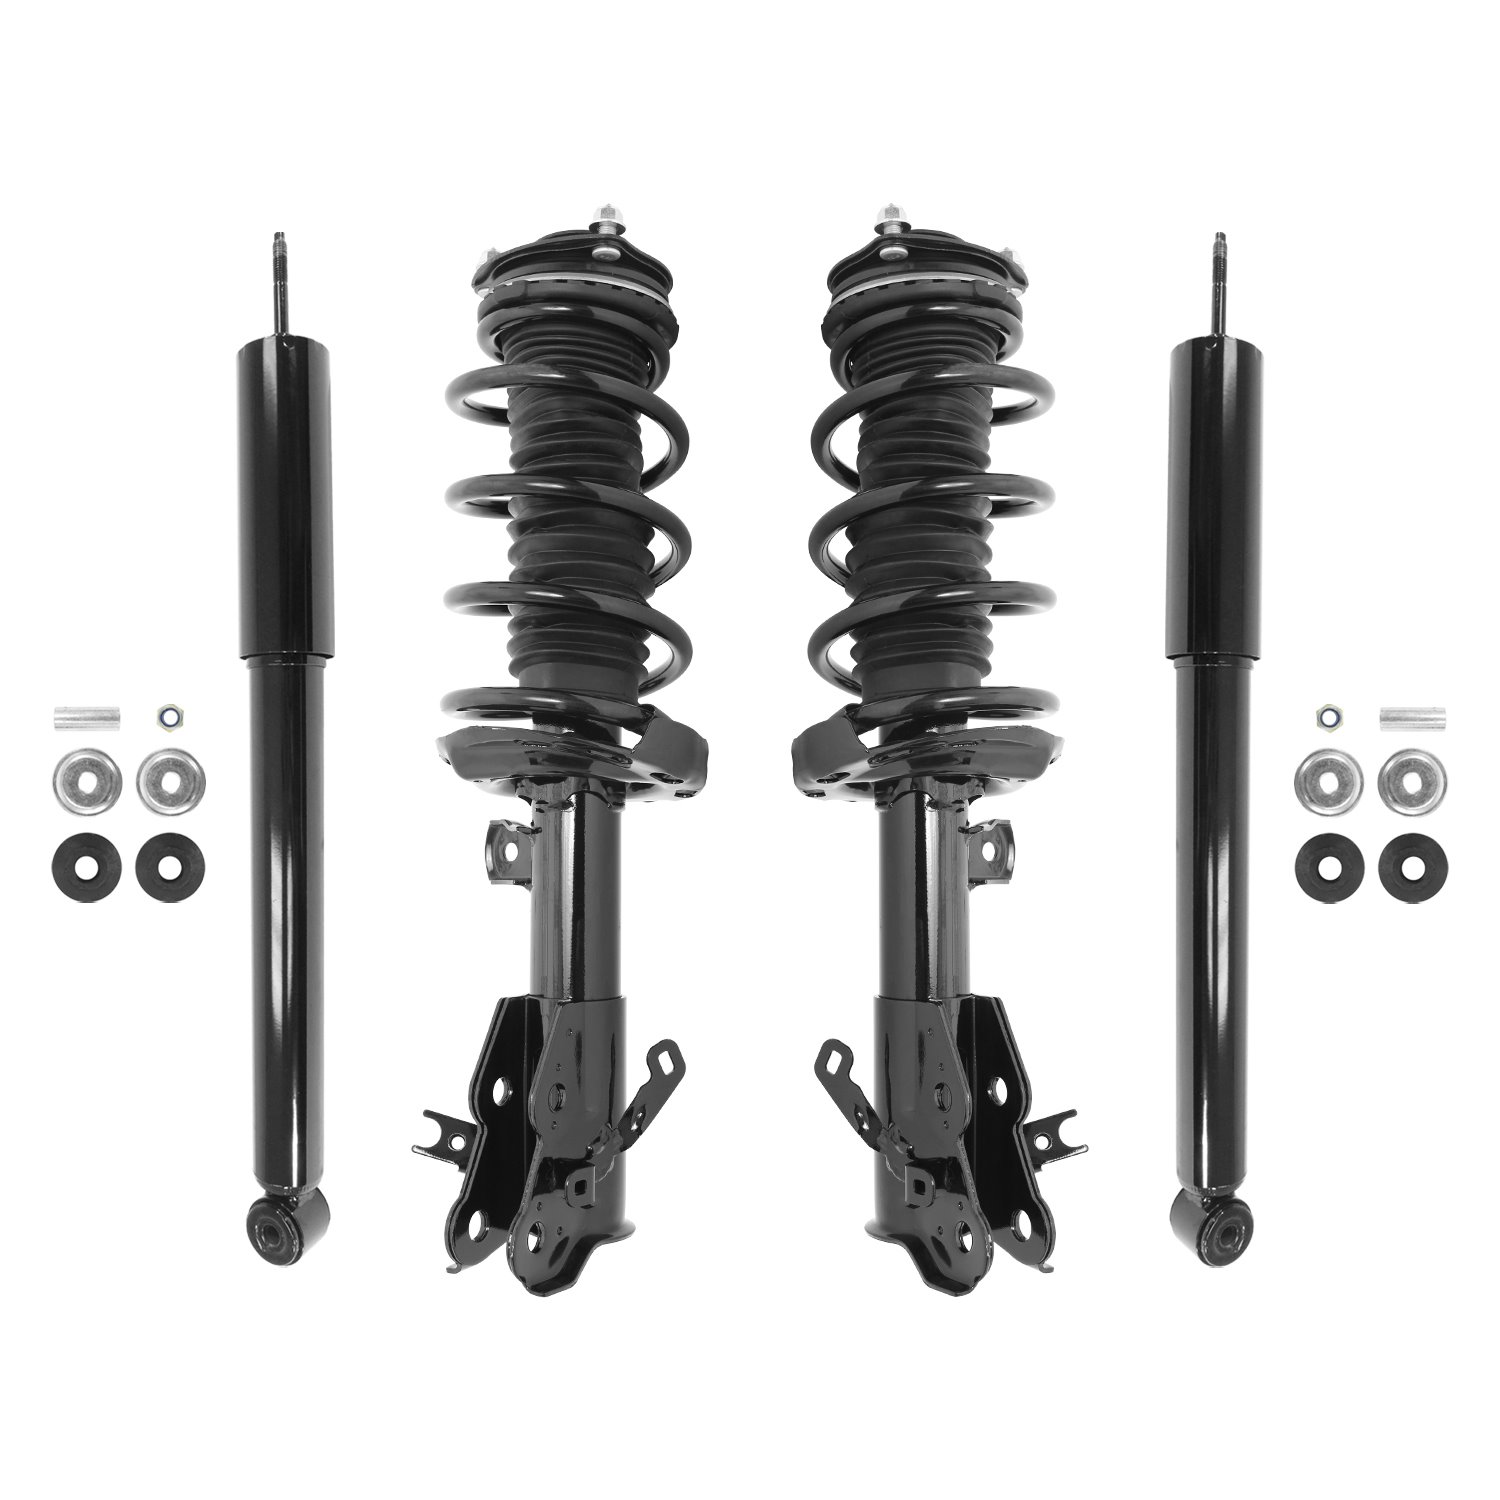 4-11325-253080-001 Front & Rear Suspension Strut & Coil Spring Assembly Fits Select Honda Civic